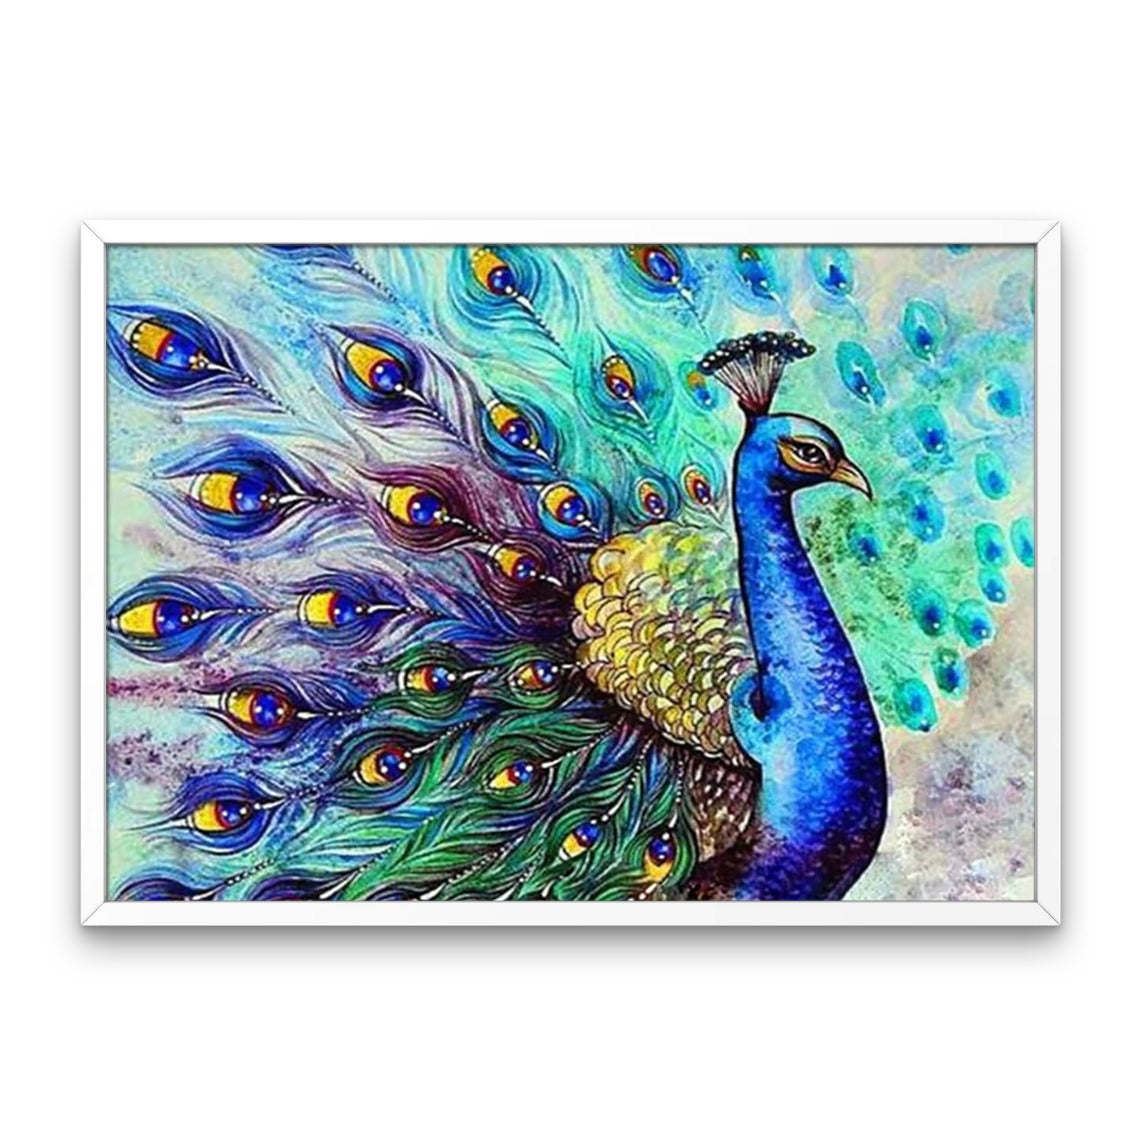 Peacock with Open Feathers - Diamond Painting Kit